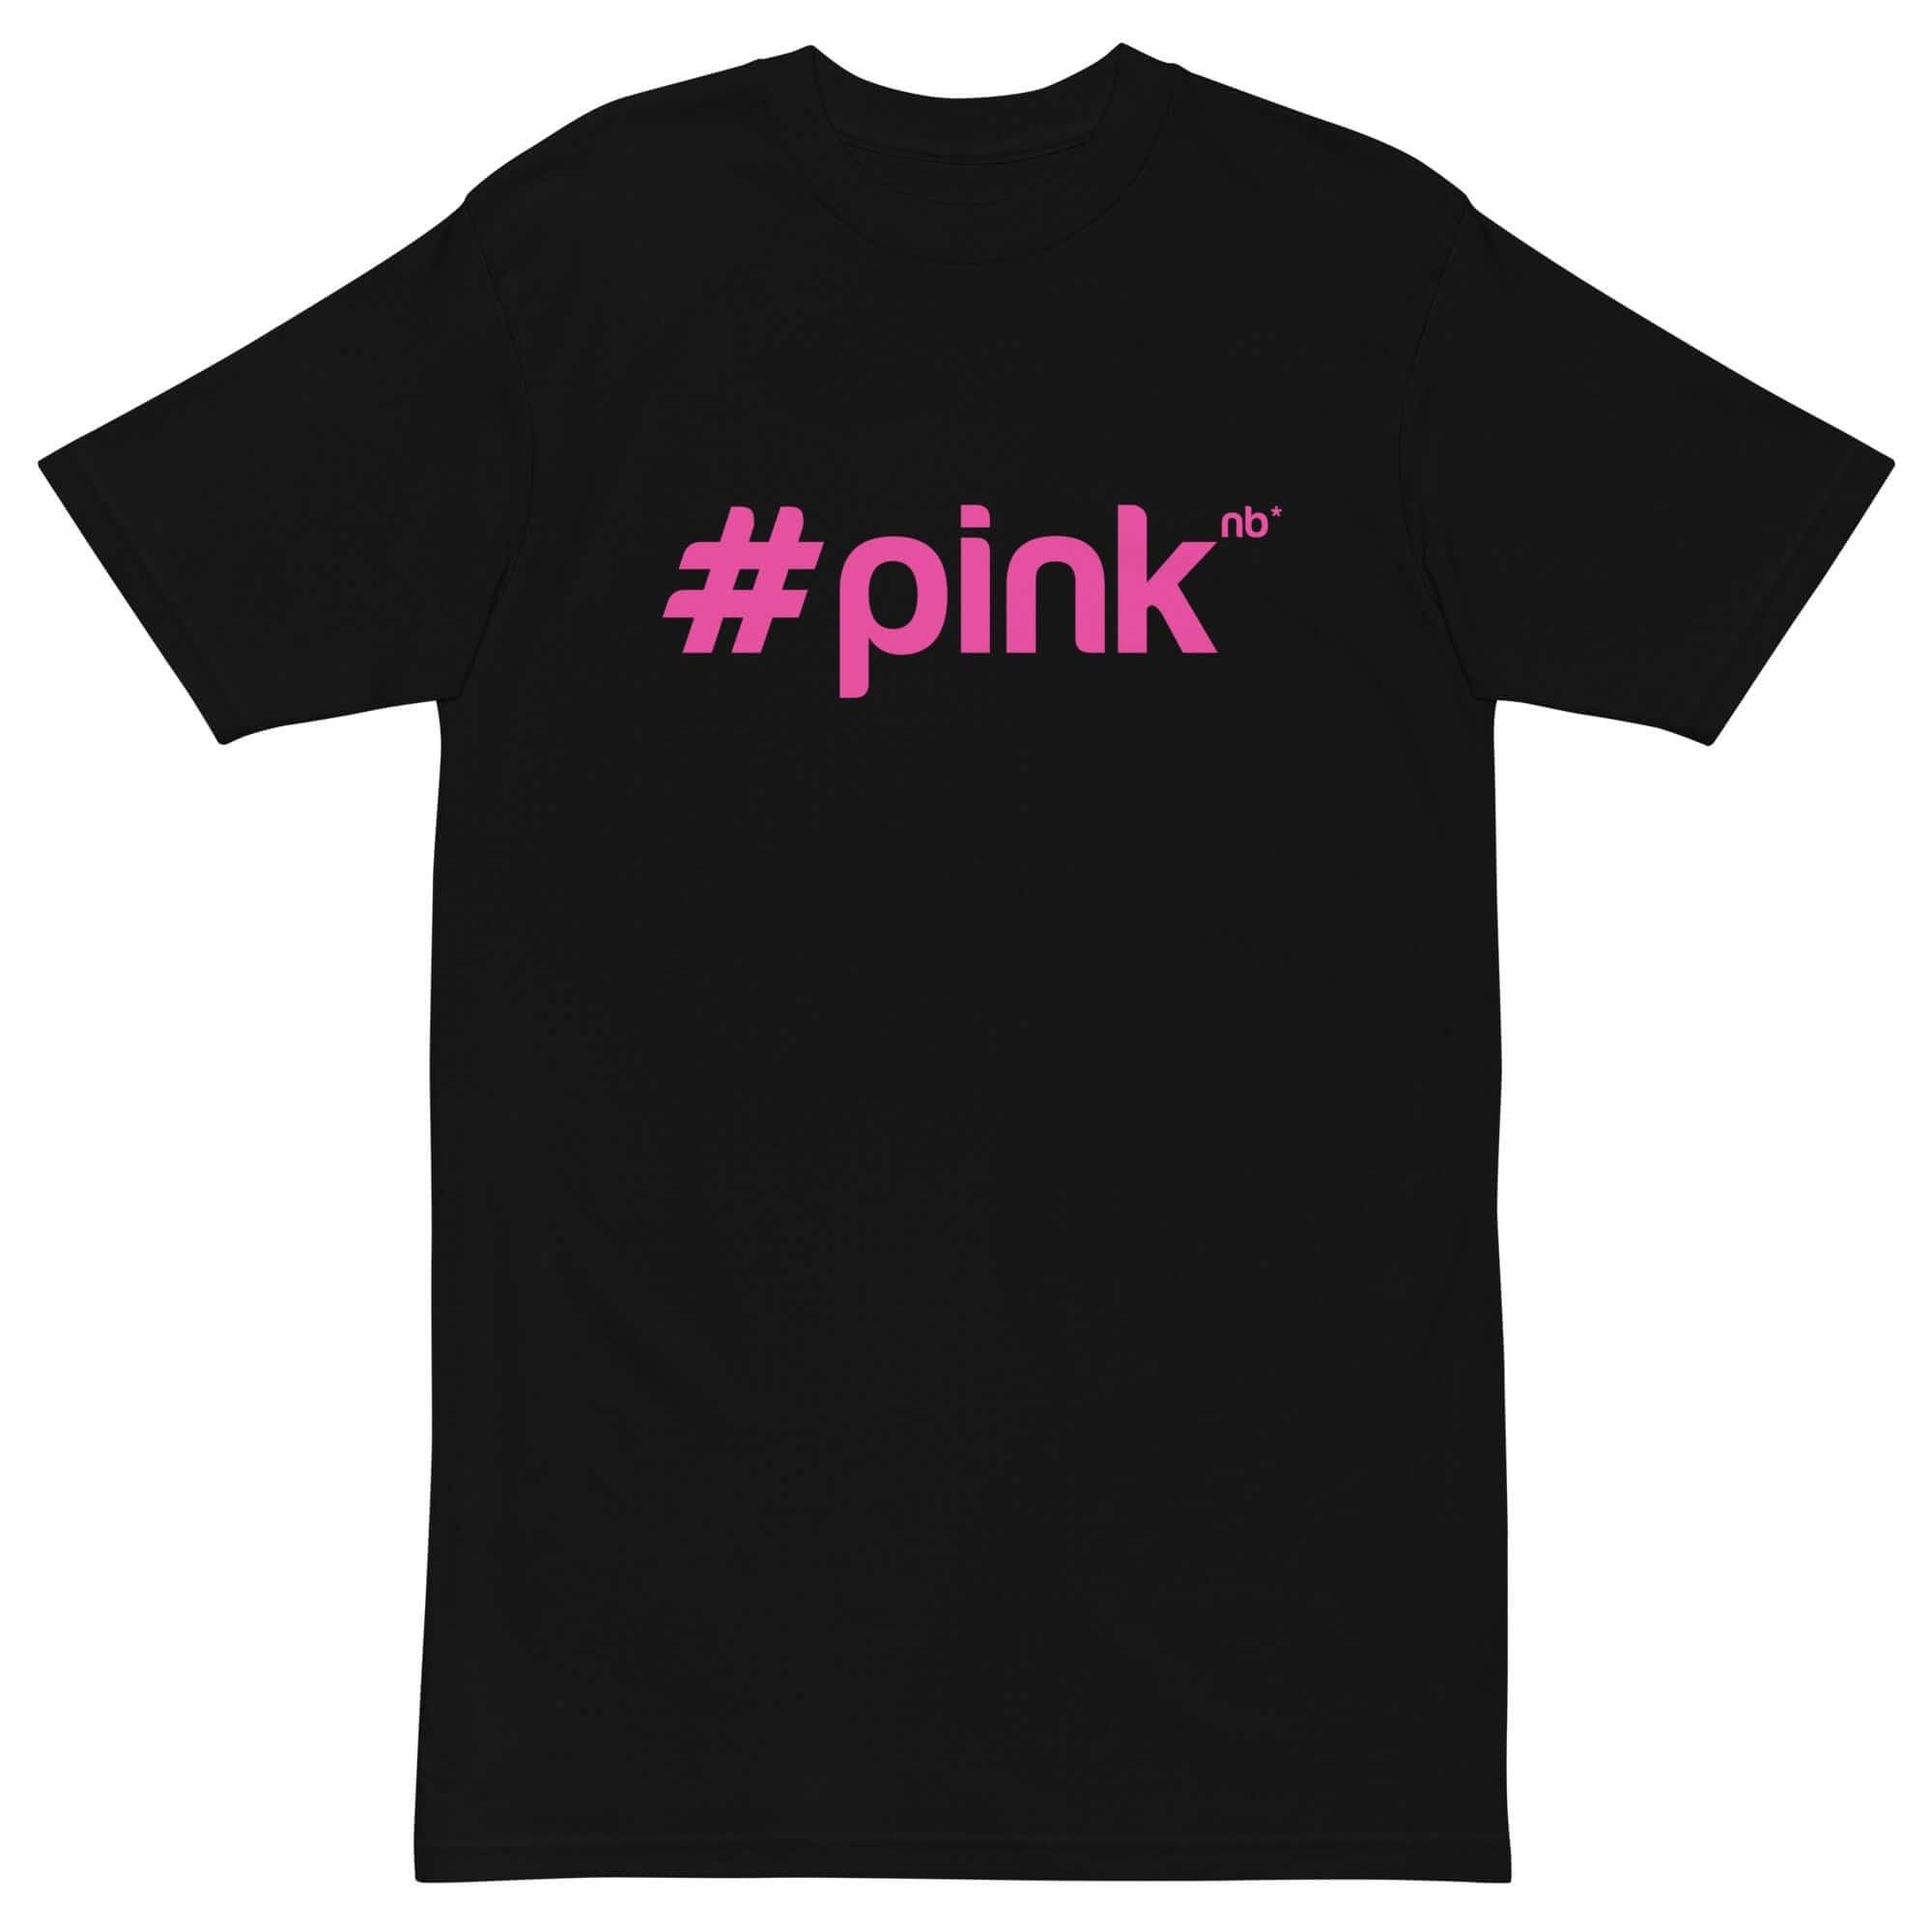 Nutribal THE PINK TEE Unisex T-Shirt - Nutribal™ - The New Healthy.